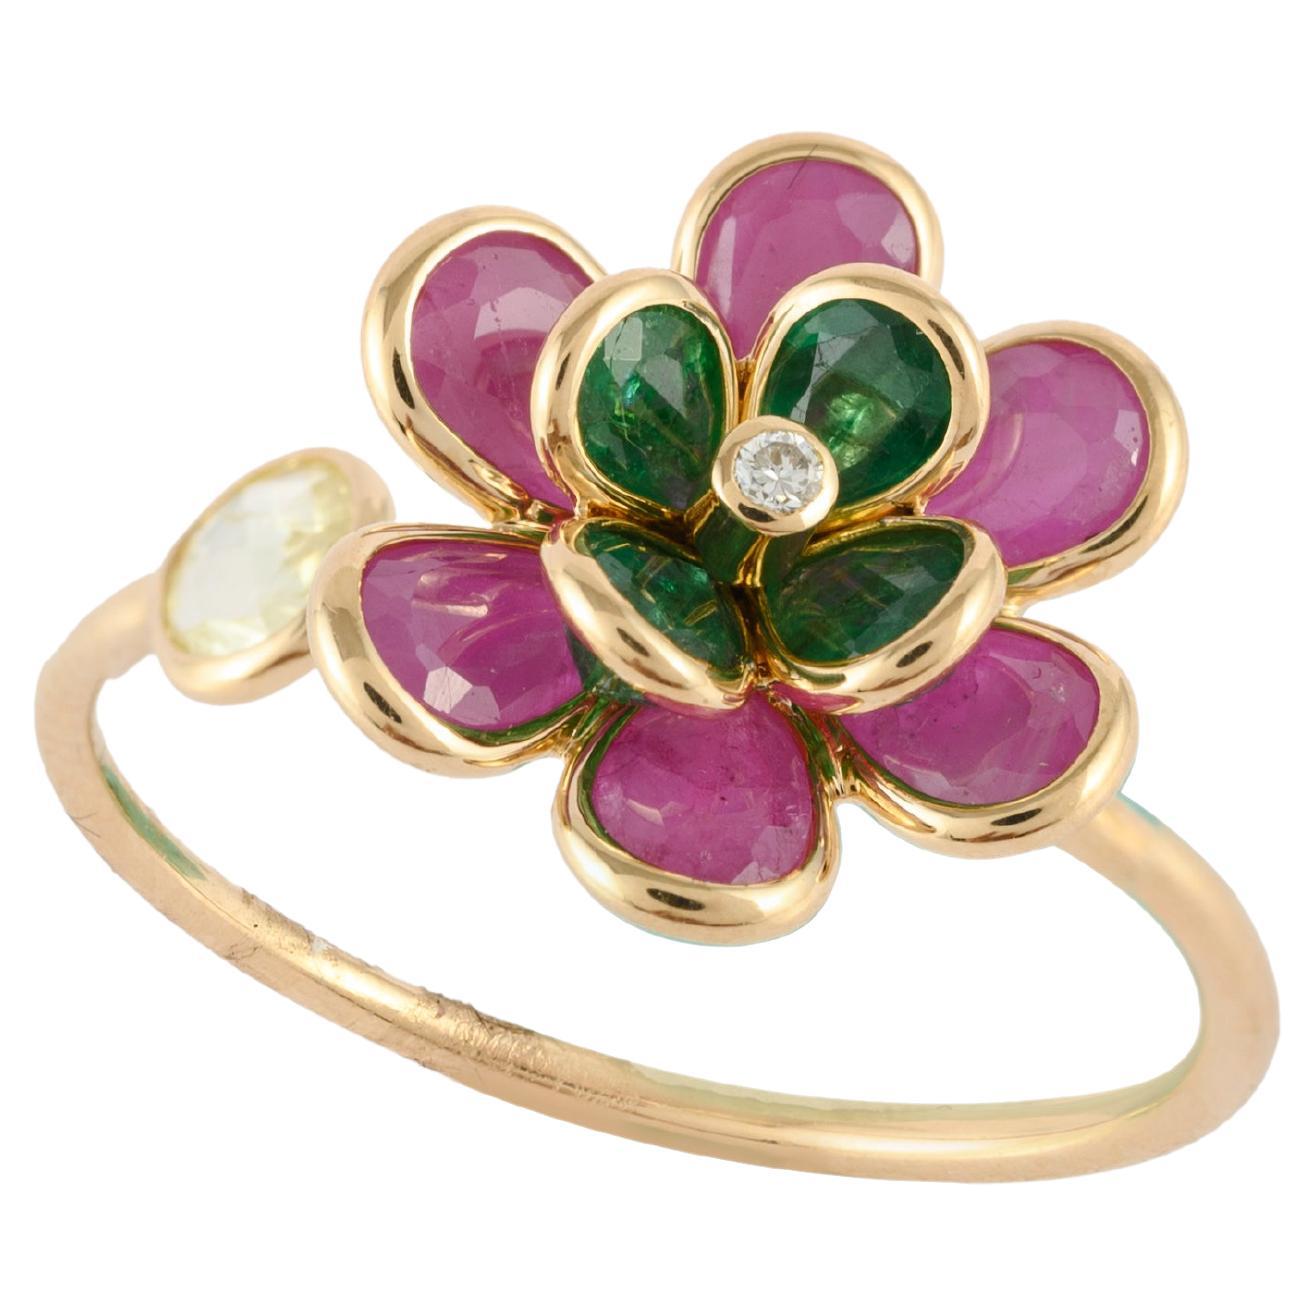 Pragnell Vintage 1837-1890 18kt Yellow Gold Ruby And Emerald Ring - Farfetch